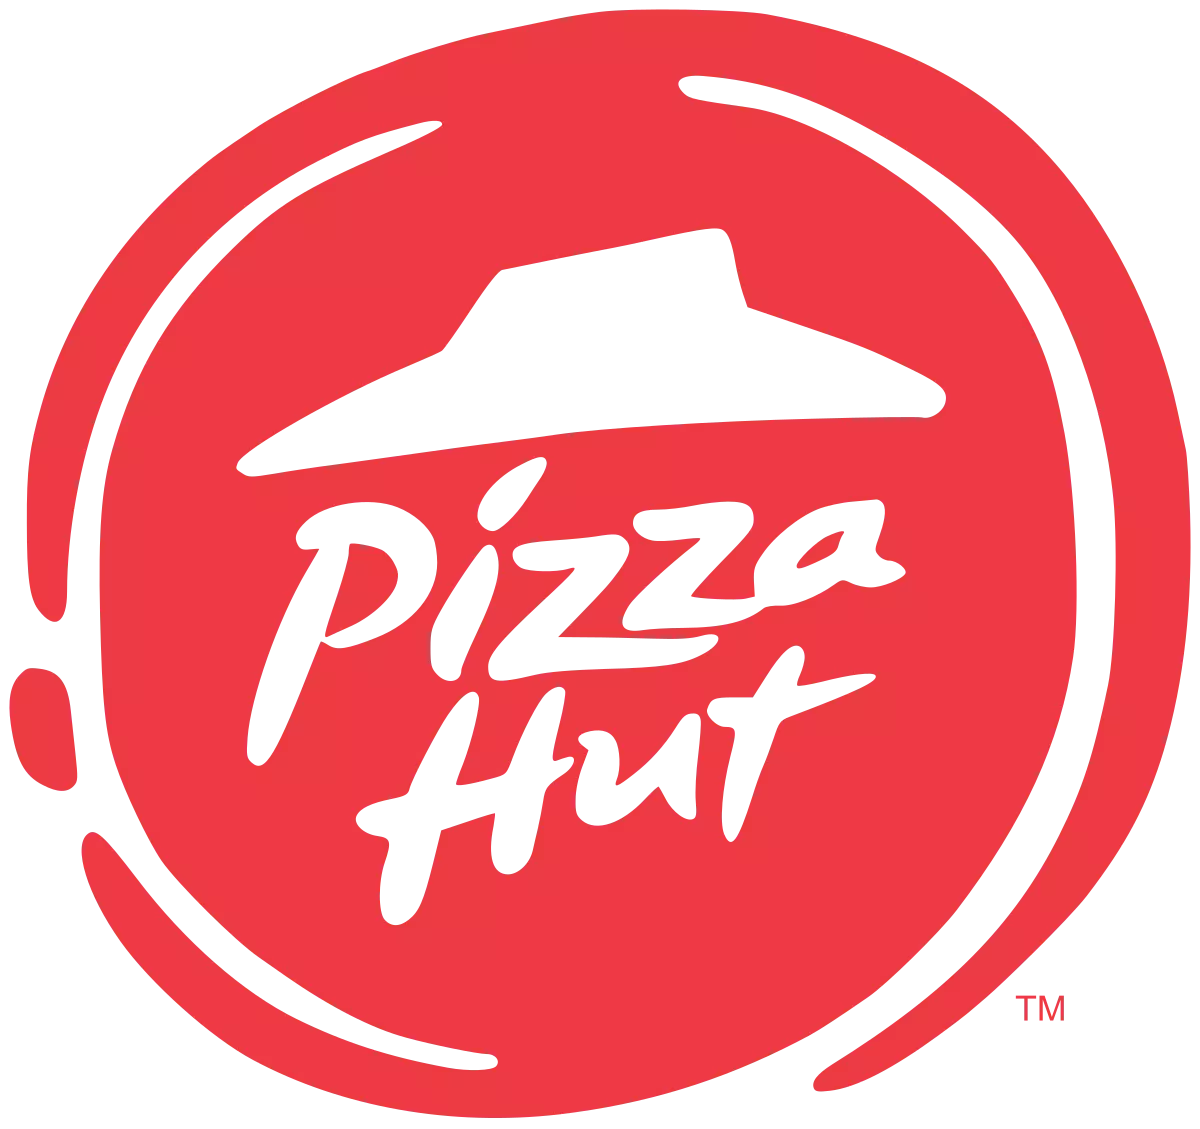 PT Sarimelati Kencana Tbk is the franchisee of Pizza Hut brand in Indonesia